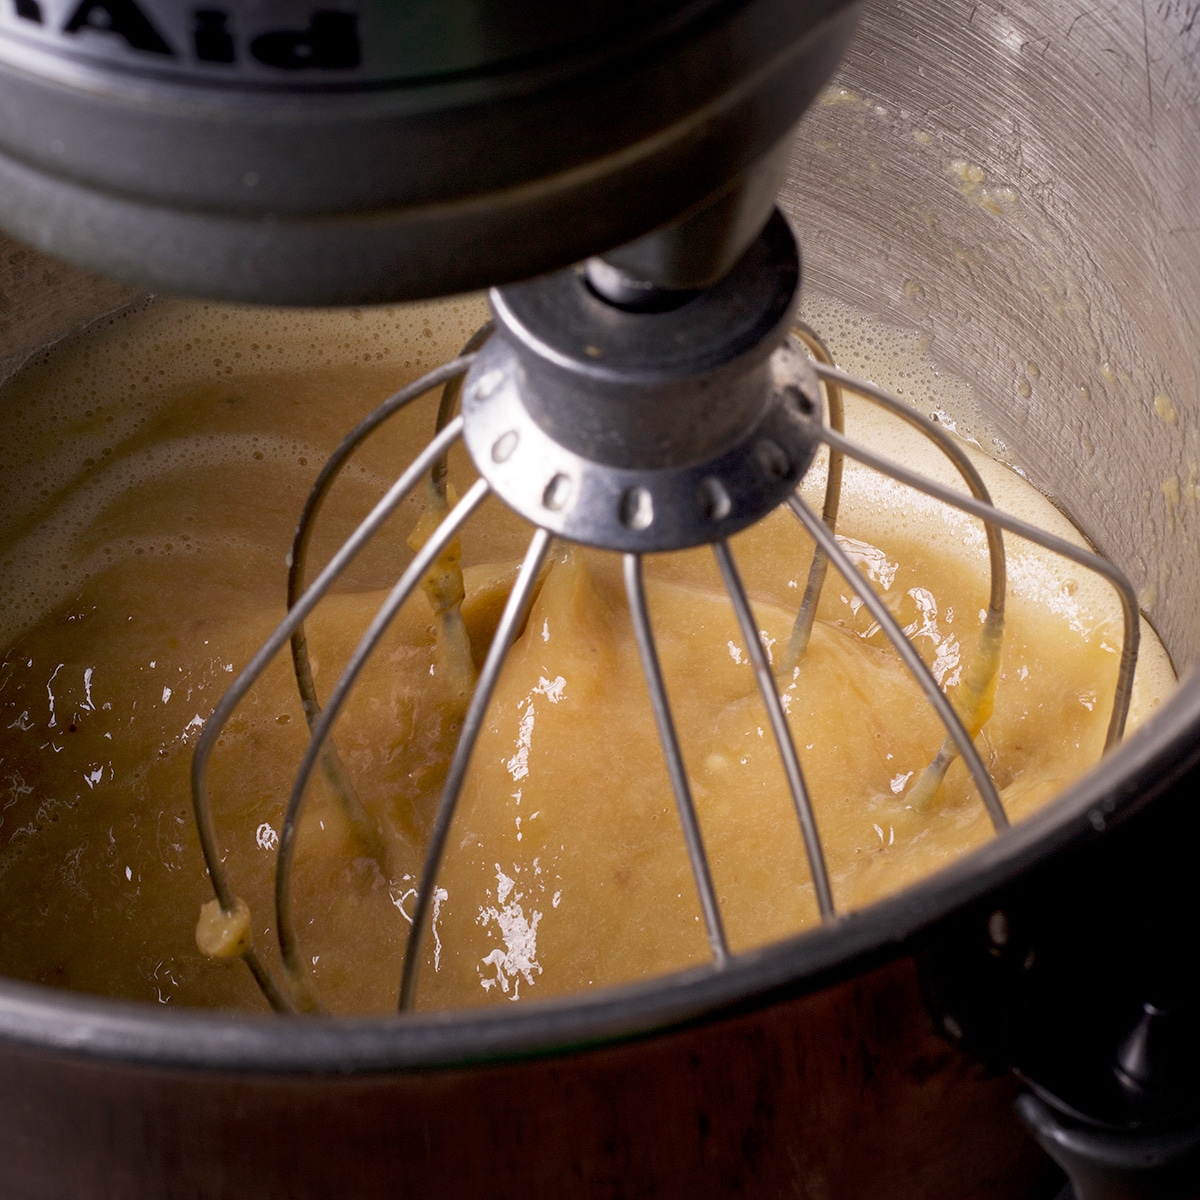 Looking down into the bowl of a stand mixer while it beats the wet ingredients for gluten free banana muffin batter.